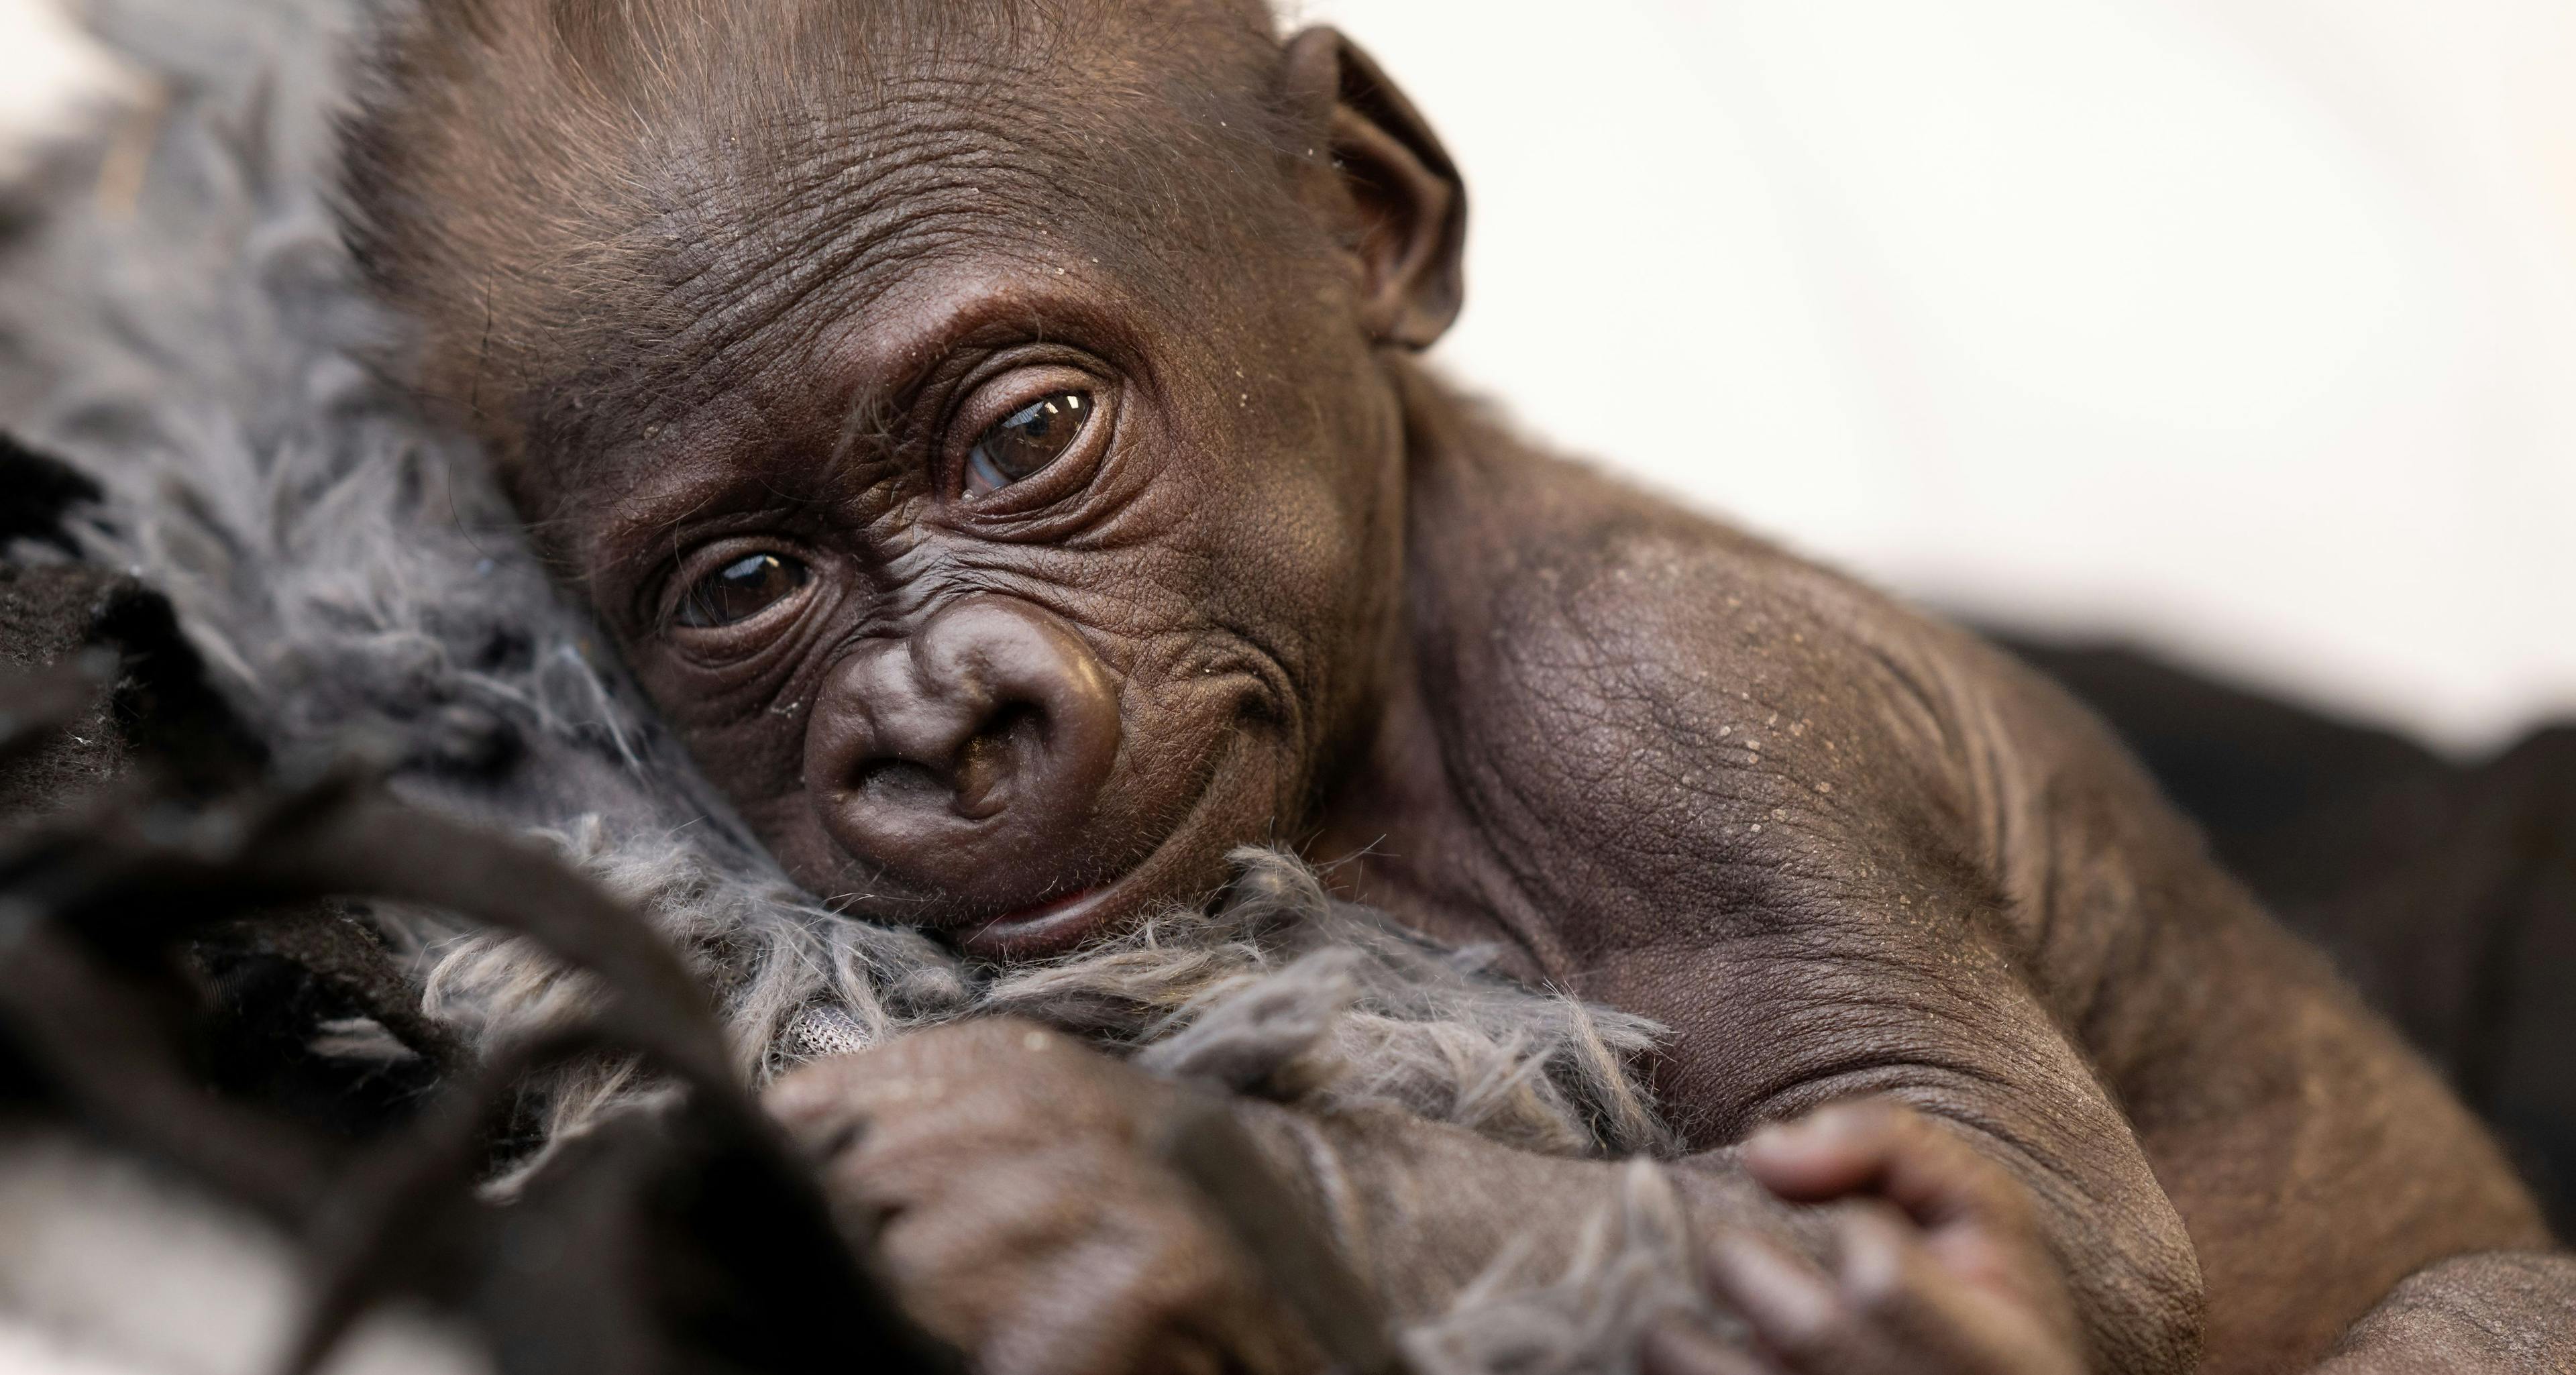 Fort Worth Zoo welcomes baby gorilla after a historic birth 